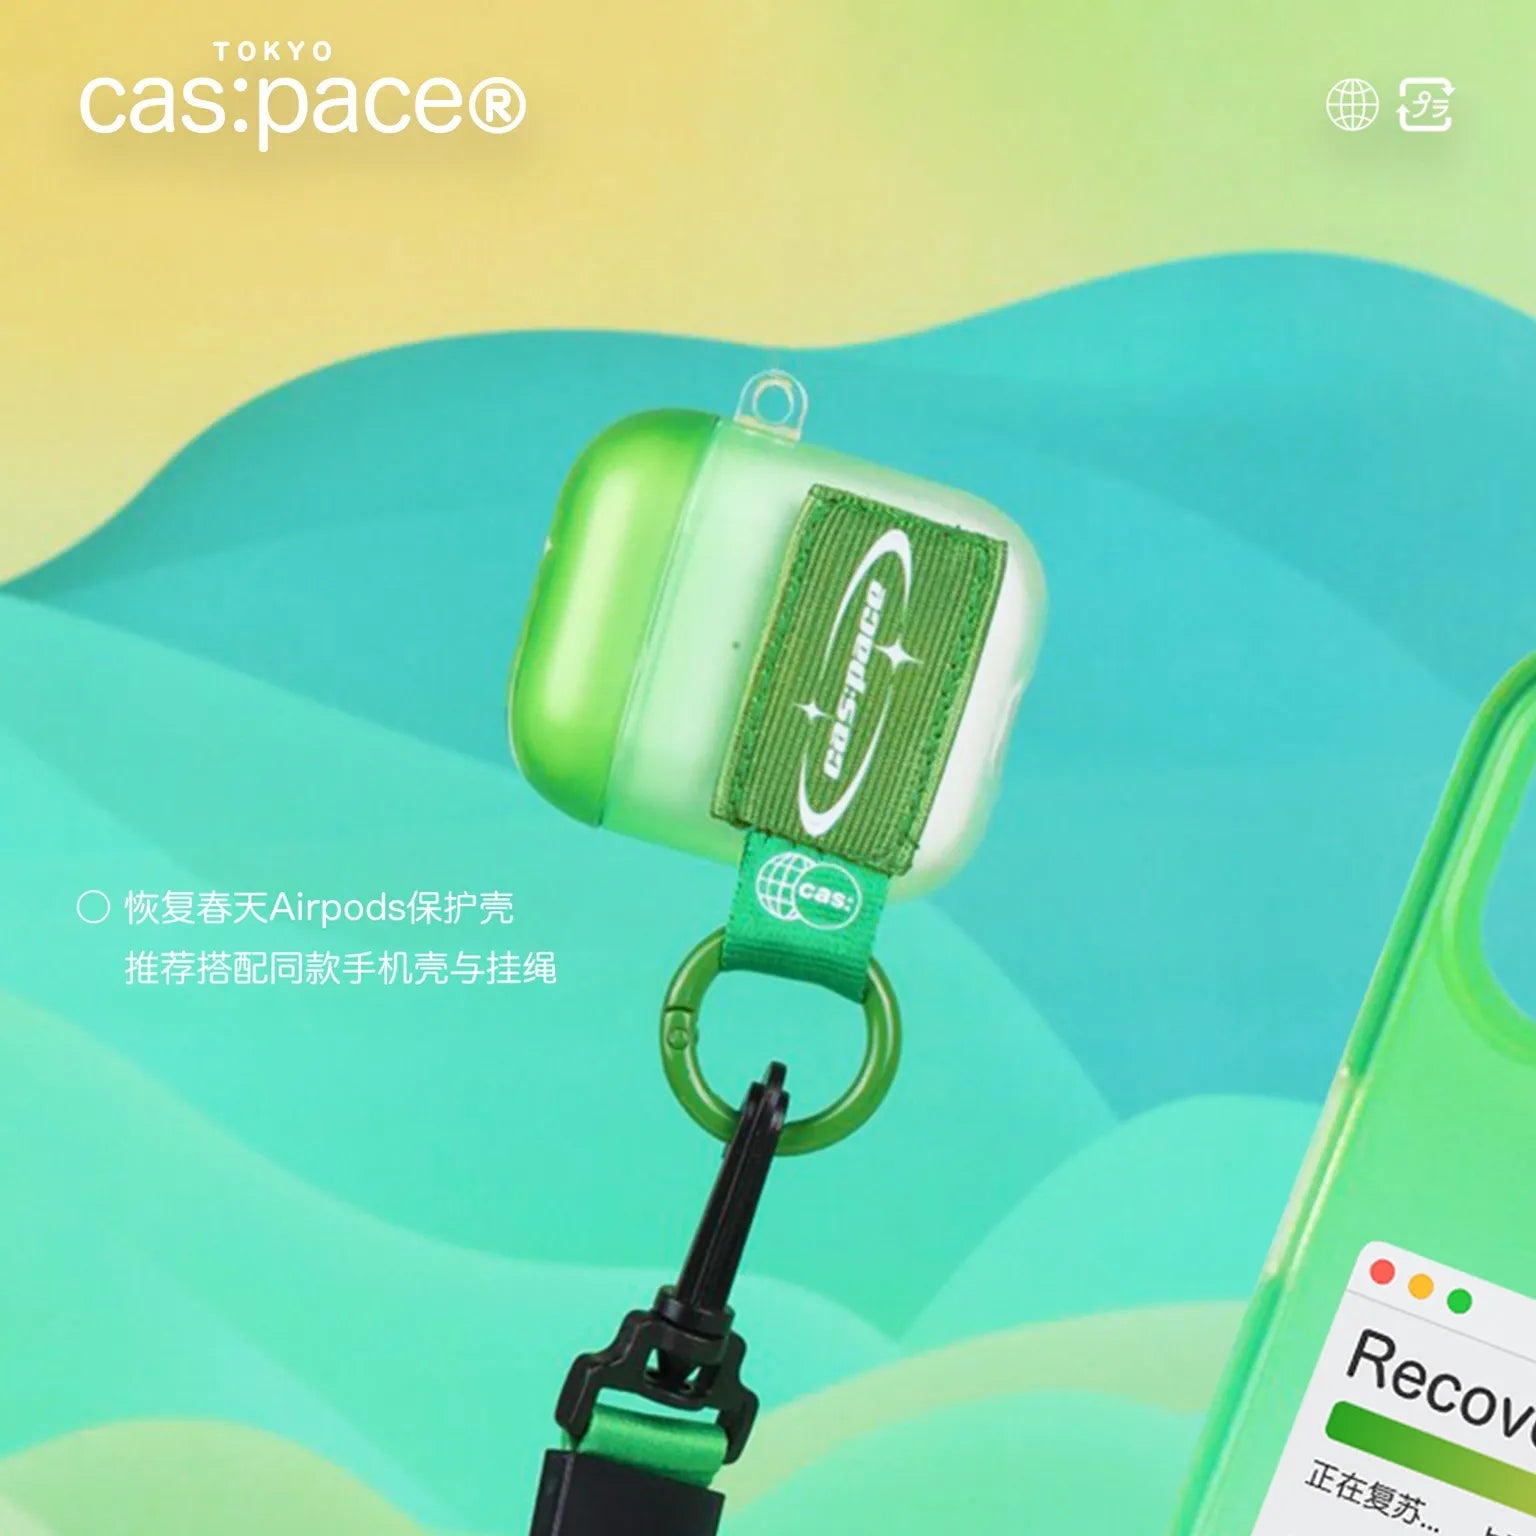 cas:pace 22S/S 「春に戻る」AirPodsケース - cas:pace 殼空間